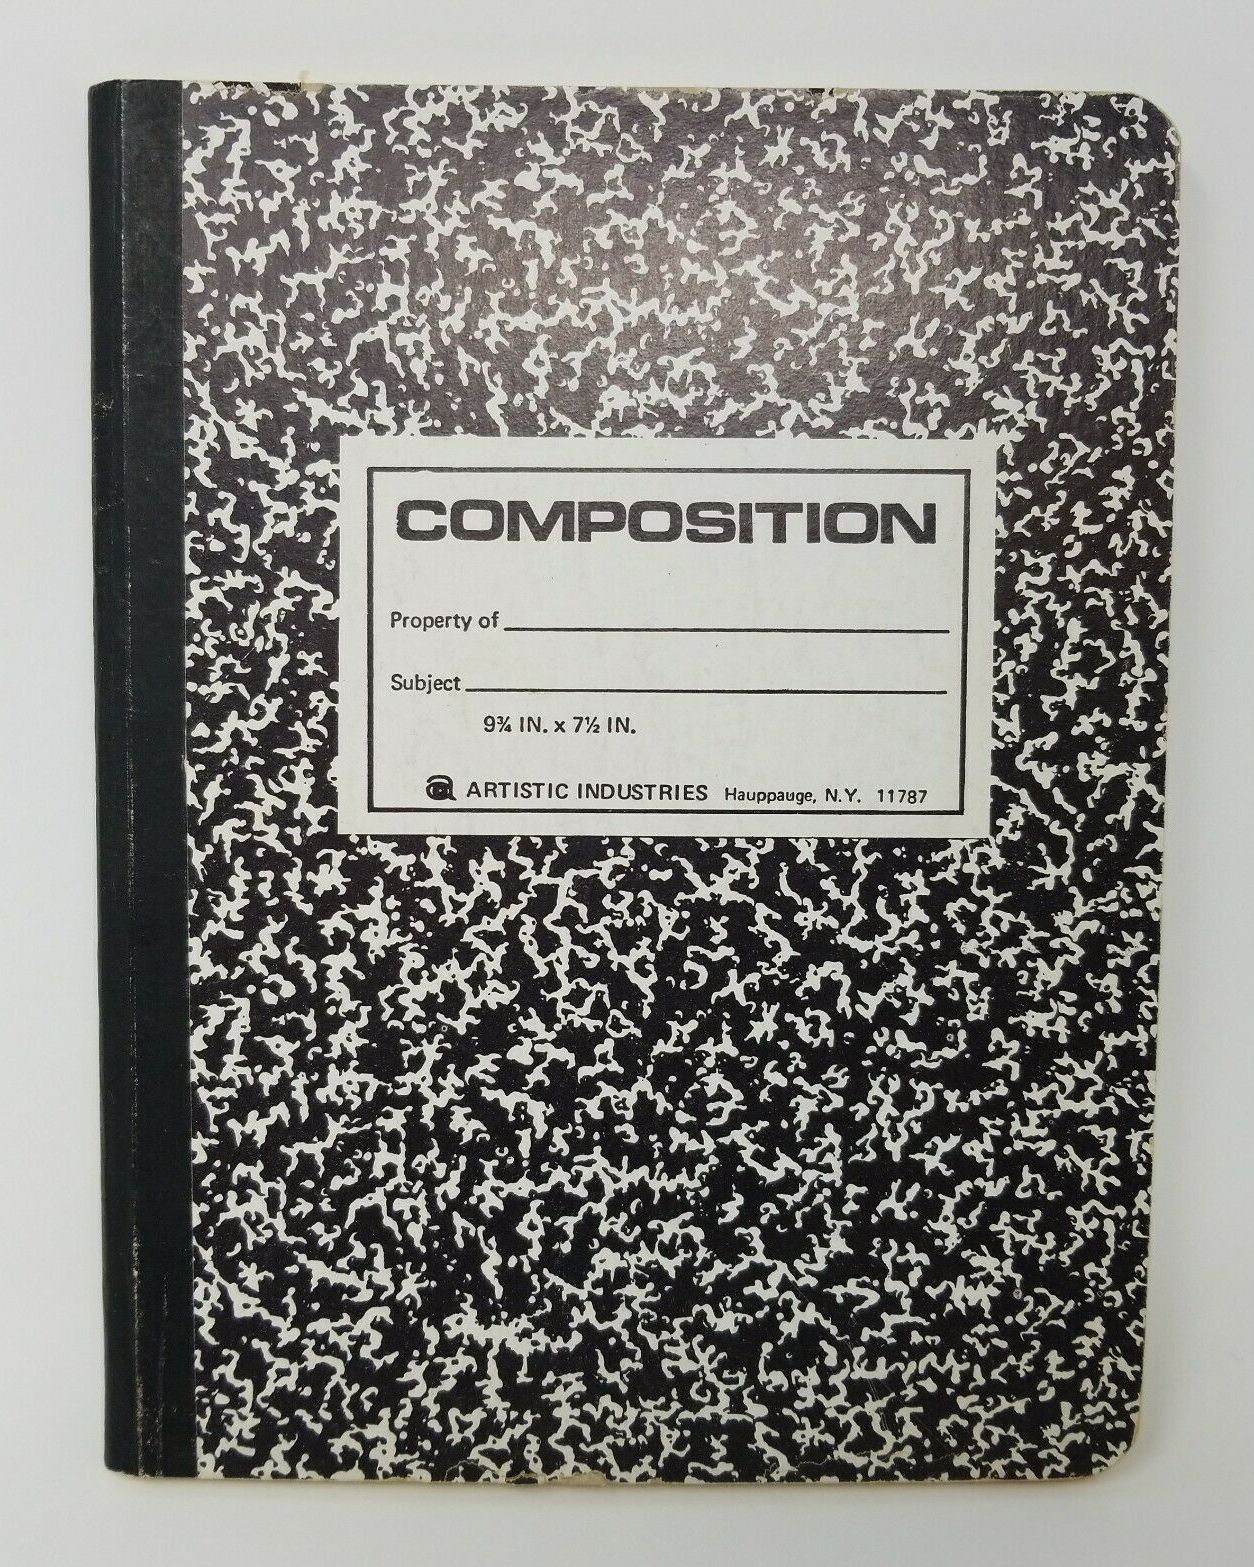 Of all the supplies on our list, marbled composition books are probably still in widest use today and might be one of the most iconic school supplies of all time. The eye-catching design likely <a href="https://mentalfloss.com/article/585201/long-history-marbled-composition-book">made its way stateside from Europe</a> in the late 1800s, and it's been a top seller here ever since, likely thanks to the stitched, spiral-free binding that means papers can't escape. Virtually every paper company still makes its own version, <a href="https://www.amazon.com/Mead-Composition-Notebooks-Fashion-Assorted/dp/B0028N6PSI/ref=as_li_ss_tl?ie=UTF8&linkCode=ll1&tag=msnshop-20&linkId=a1e9f82f1557d568a69805b9d95a258b&language=en_US">including brand names like Mead</a>, but store brands are widely available at big-box stores, often for under a buck a piece.<div class="rich-text"><p>This article was originally published on <a href="https://blog.cheapism.com/retro-school-supplies/">Cheapism</a></p></div>